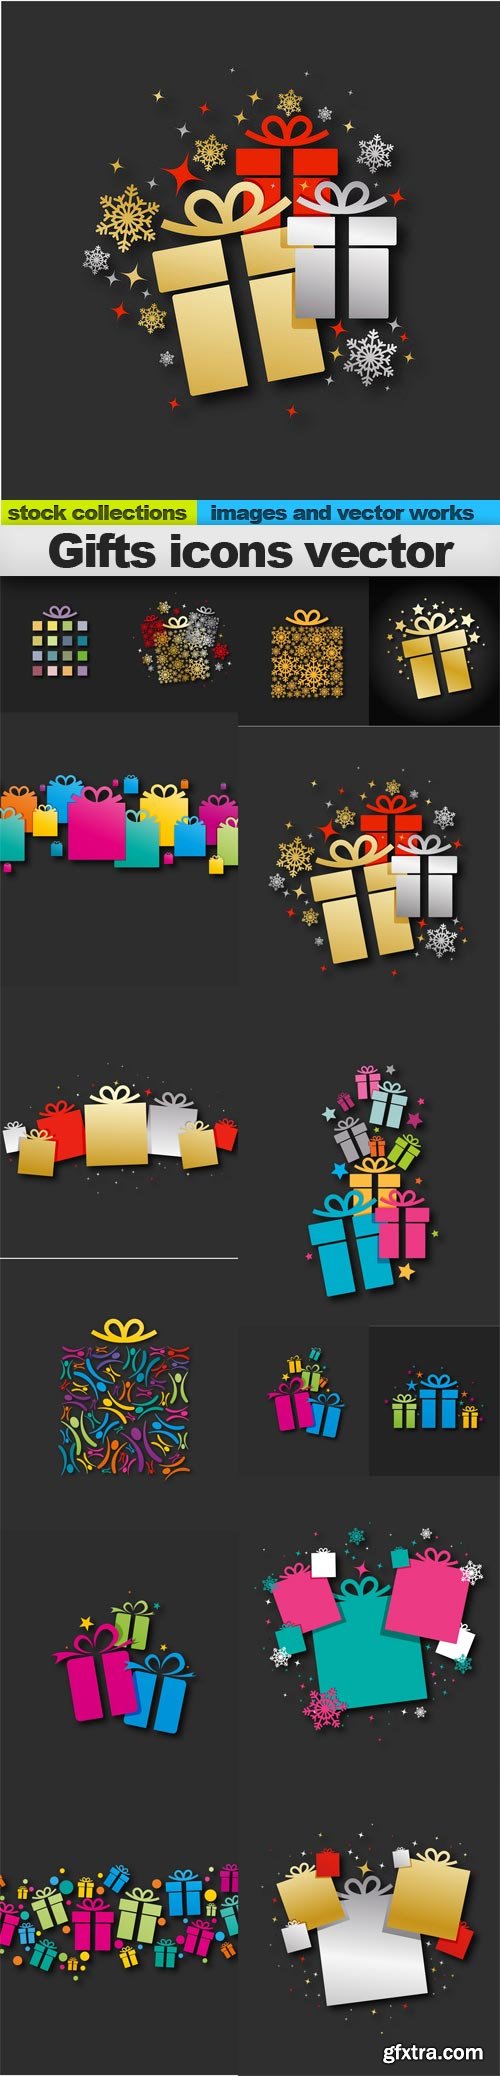 Gifts icons vector, 15 x EPS